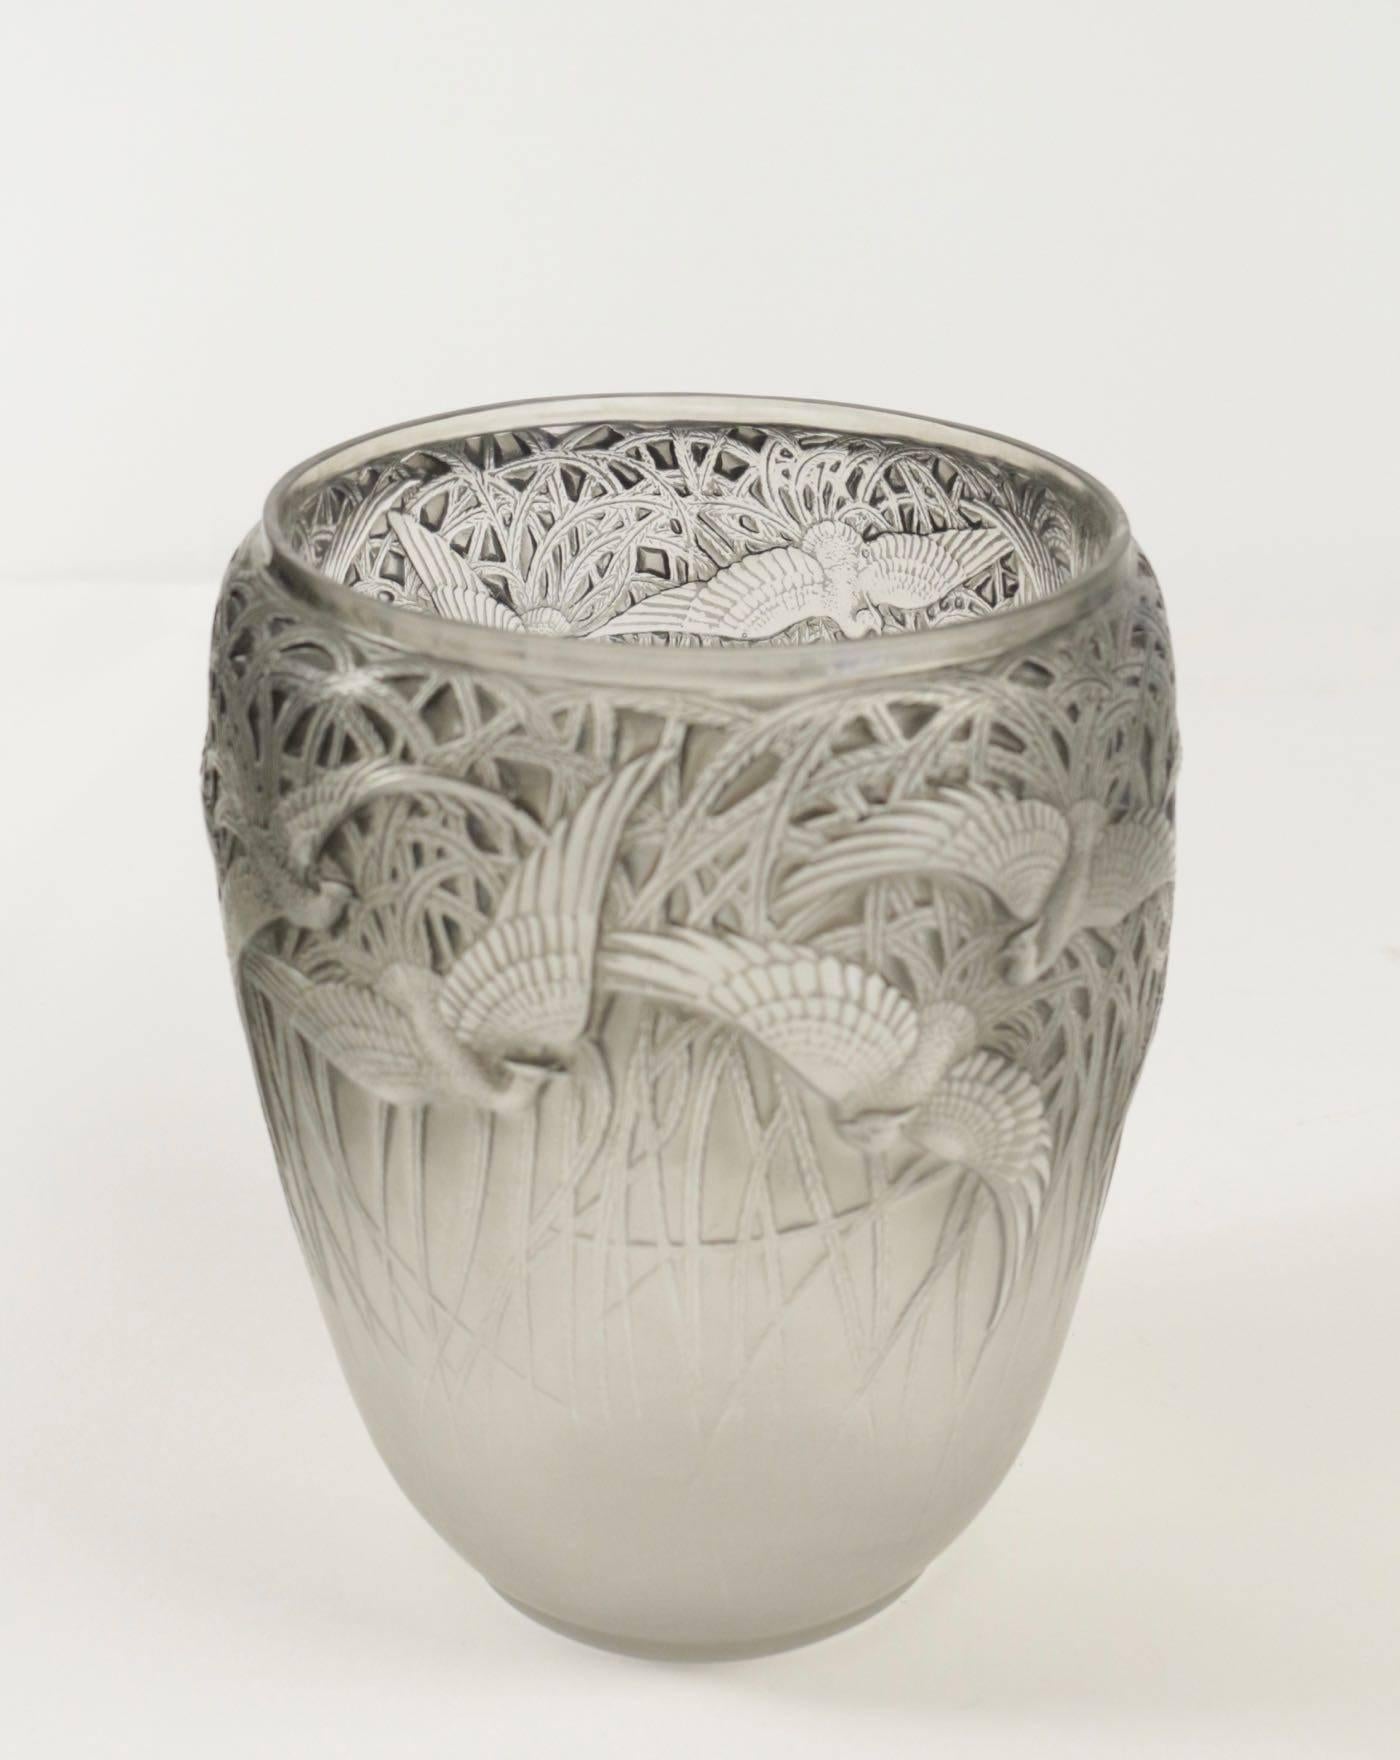 René Lalique (1860-1945)
vase Aigrettes.
Measures: 8 and 1/2 inches high.
Mold pressed glass having a flying egrets against a tall reed style plants background all around the exterior.
Glass highlighted with blue grey patinated.

Model created